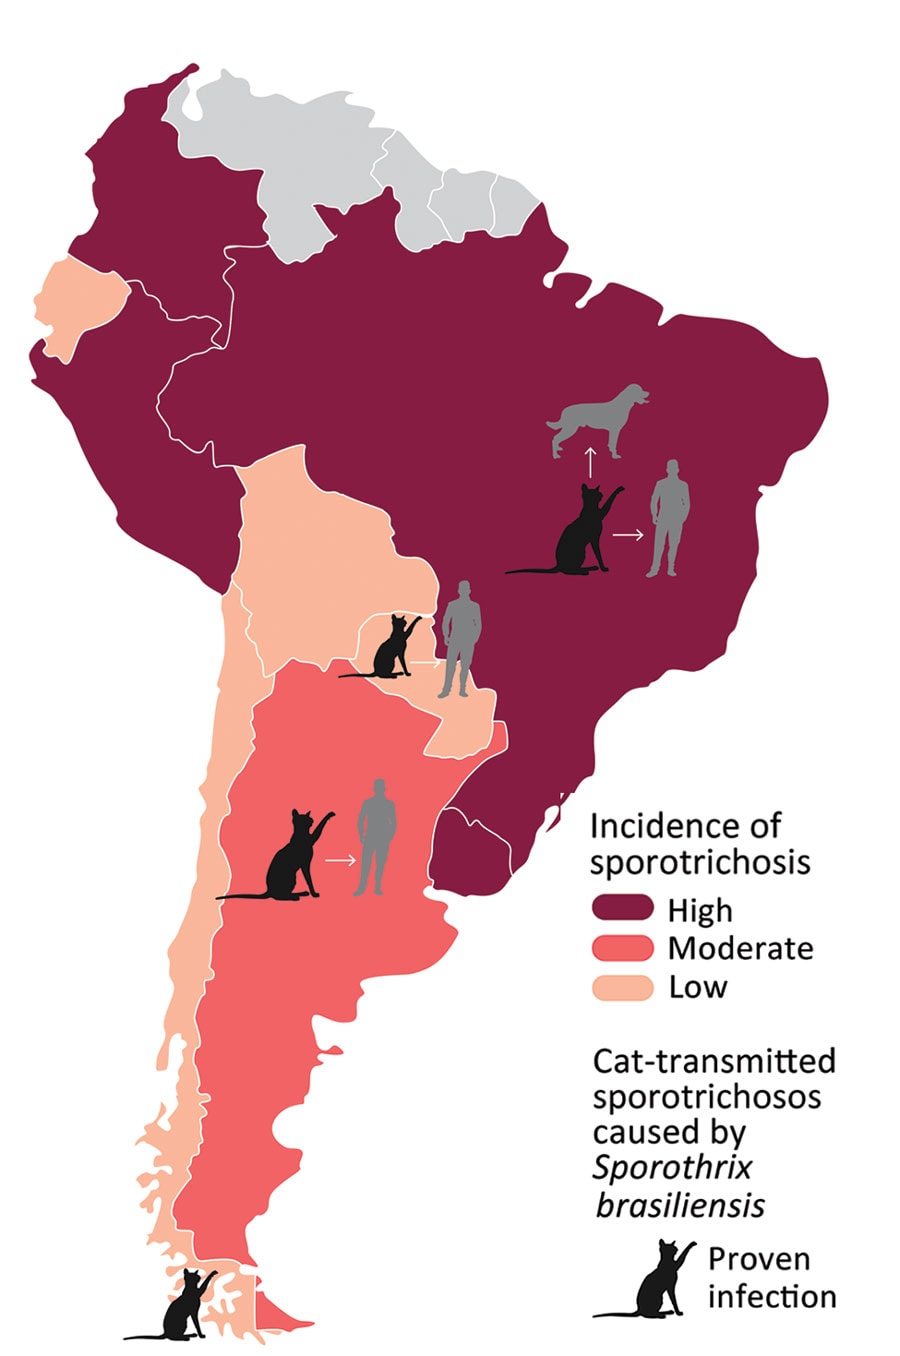 Burden of sporotrichosis in South America and distribution of cat-transmitted sporotrichosis in humans caused by Sporothrix brasiliensis, 2022. Cat icons indicate countries where cases of cat-transmitted sporotrichosis caused by S. brasiliensis have been reported; arrows indicate transmission from cats, humans, and dogs.